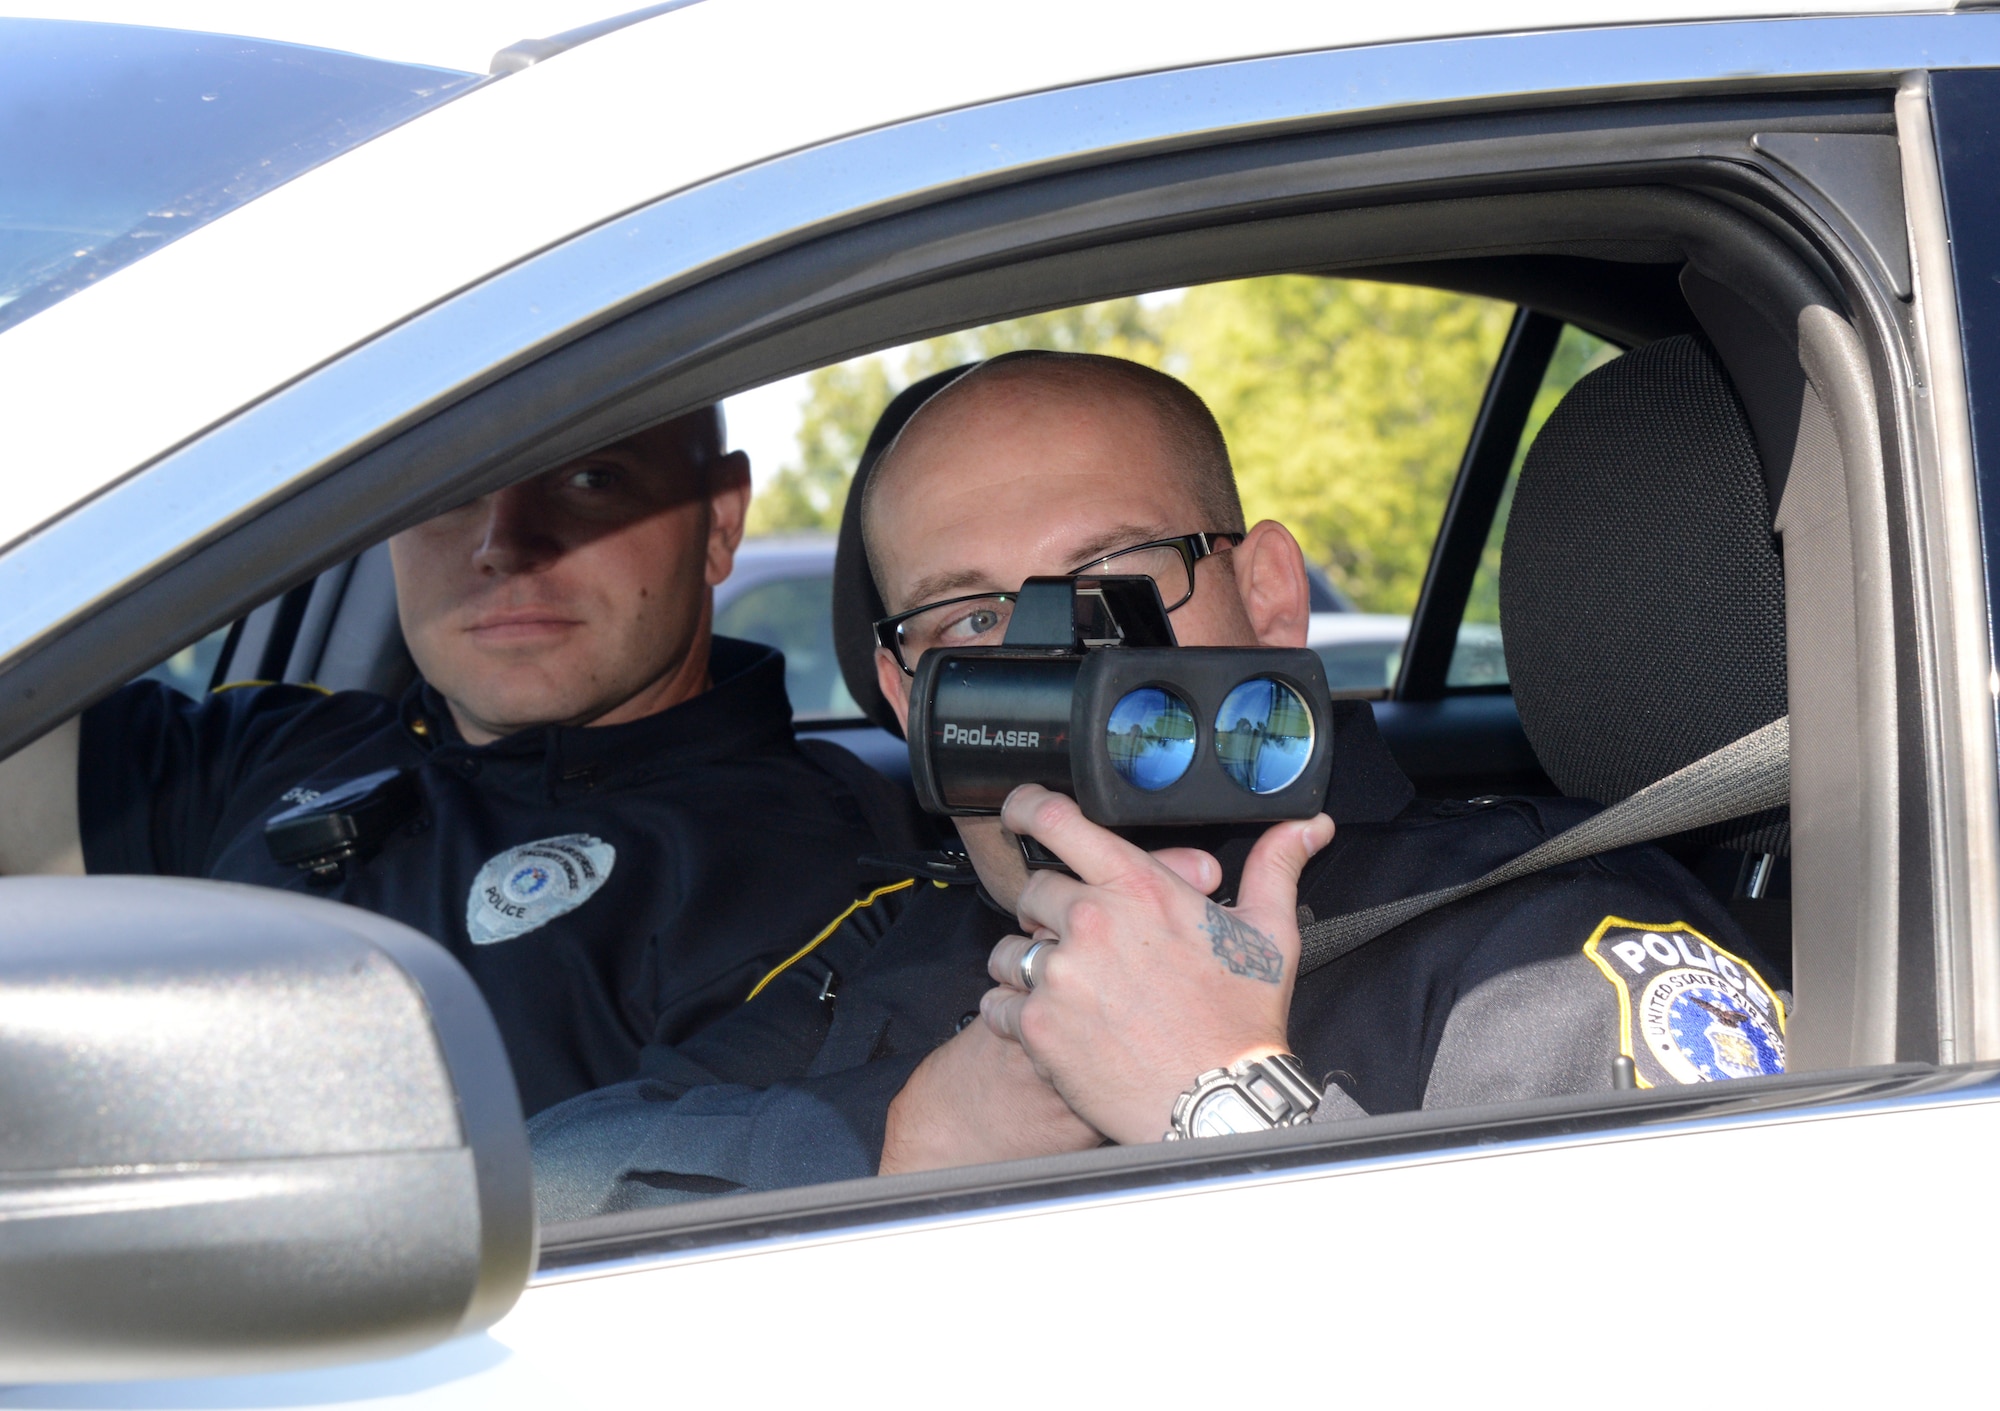 Sgt. Michael Biddy, front, and Corporal Aaron Whitehead use a radar gun to detect the speed limit of drivers on Tinker Air Force Base. The two DAF civilian police officers were both prior military before joining the civilian security forces here on base. Civilian officers are federally certified law enforcement officers and perform the same duties as the military security forces. (Air Force photo by Kelly White)